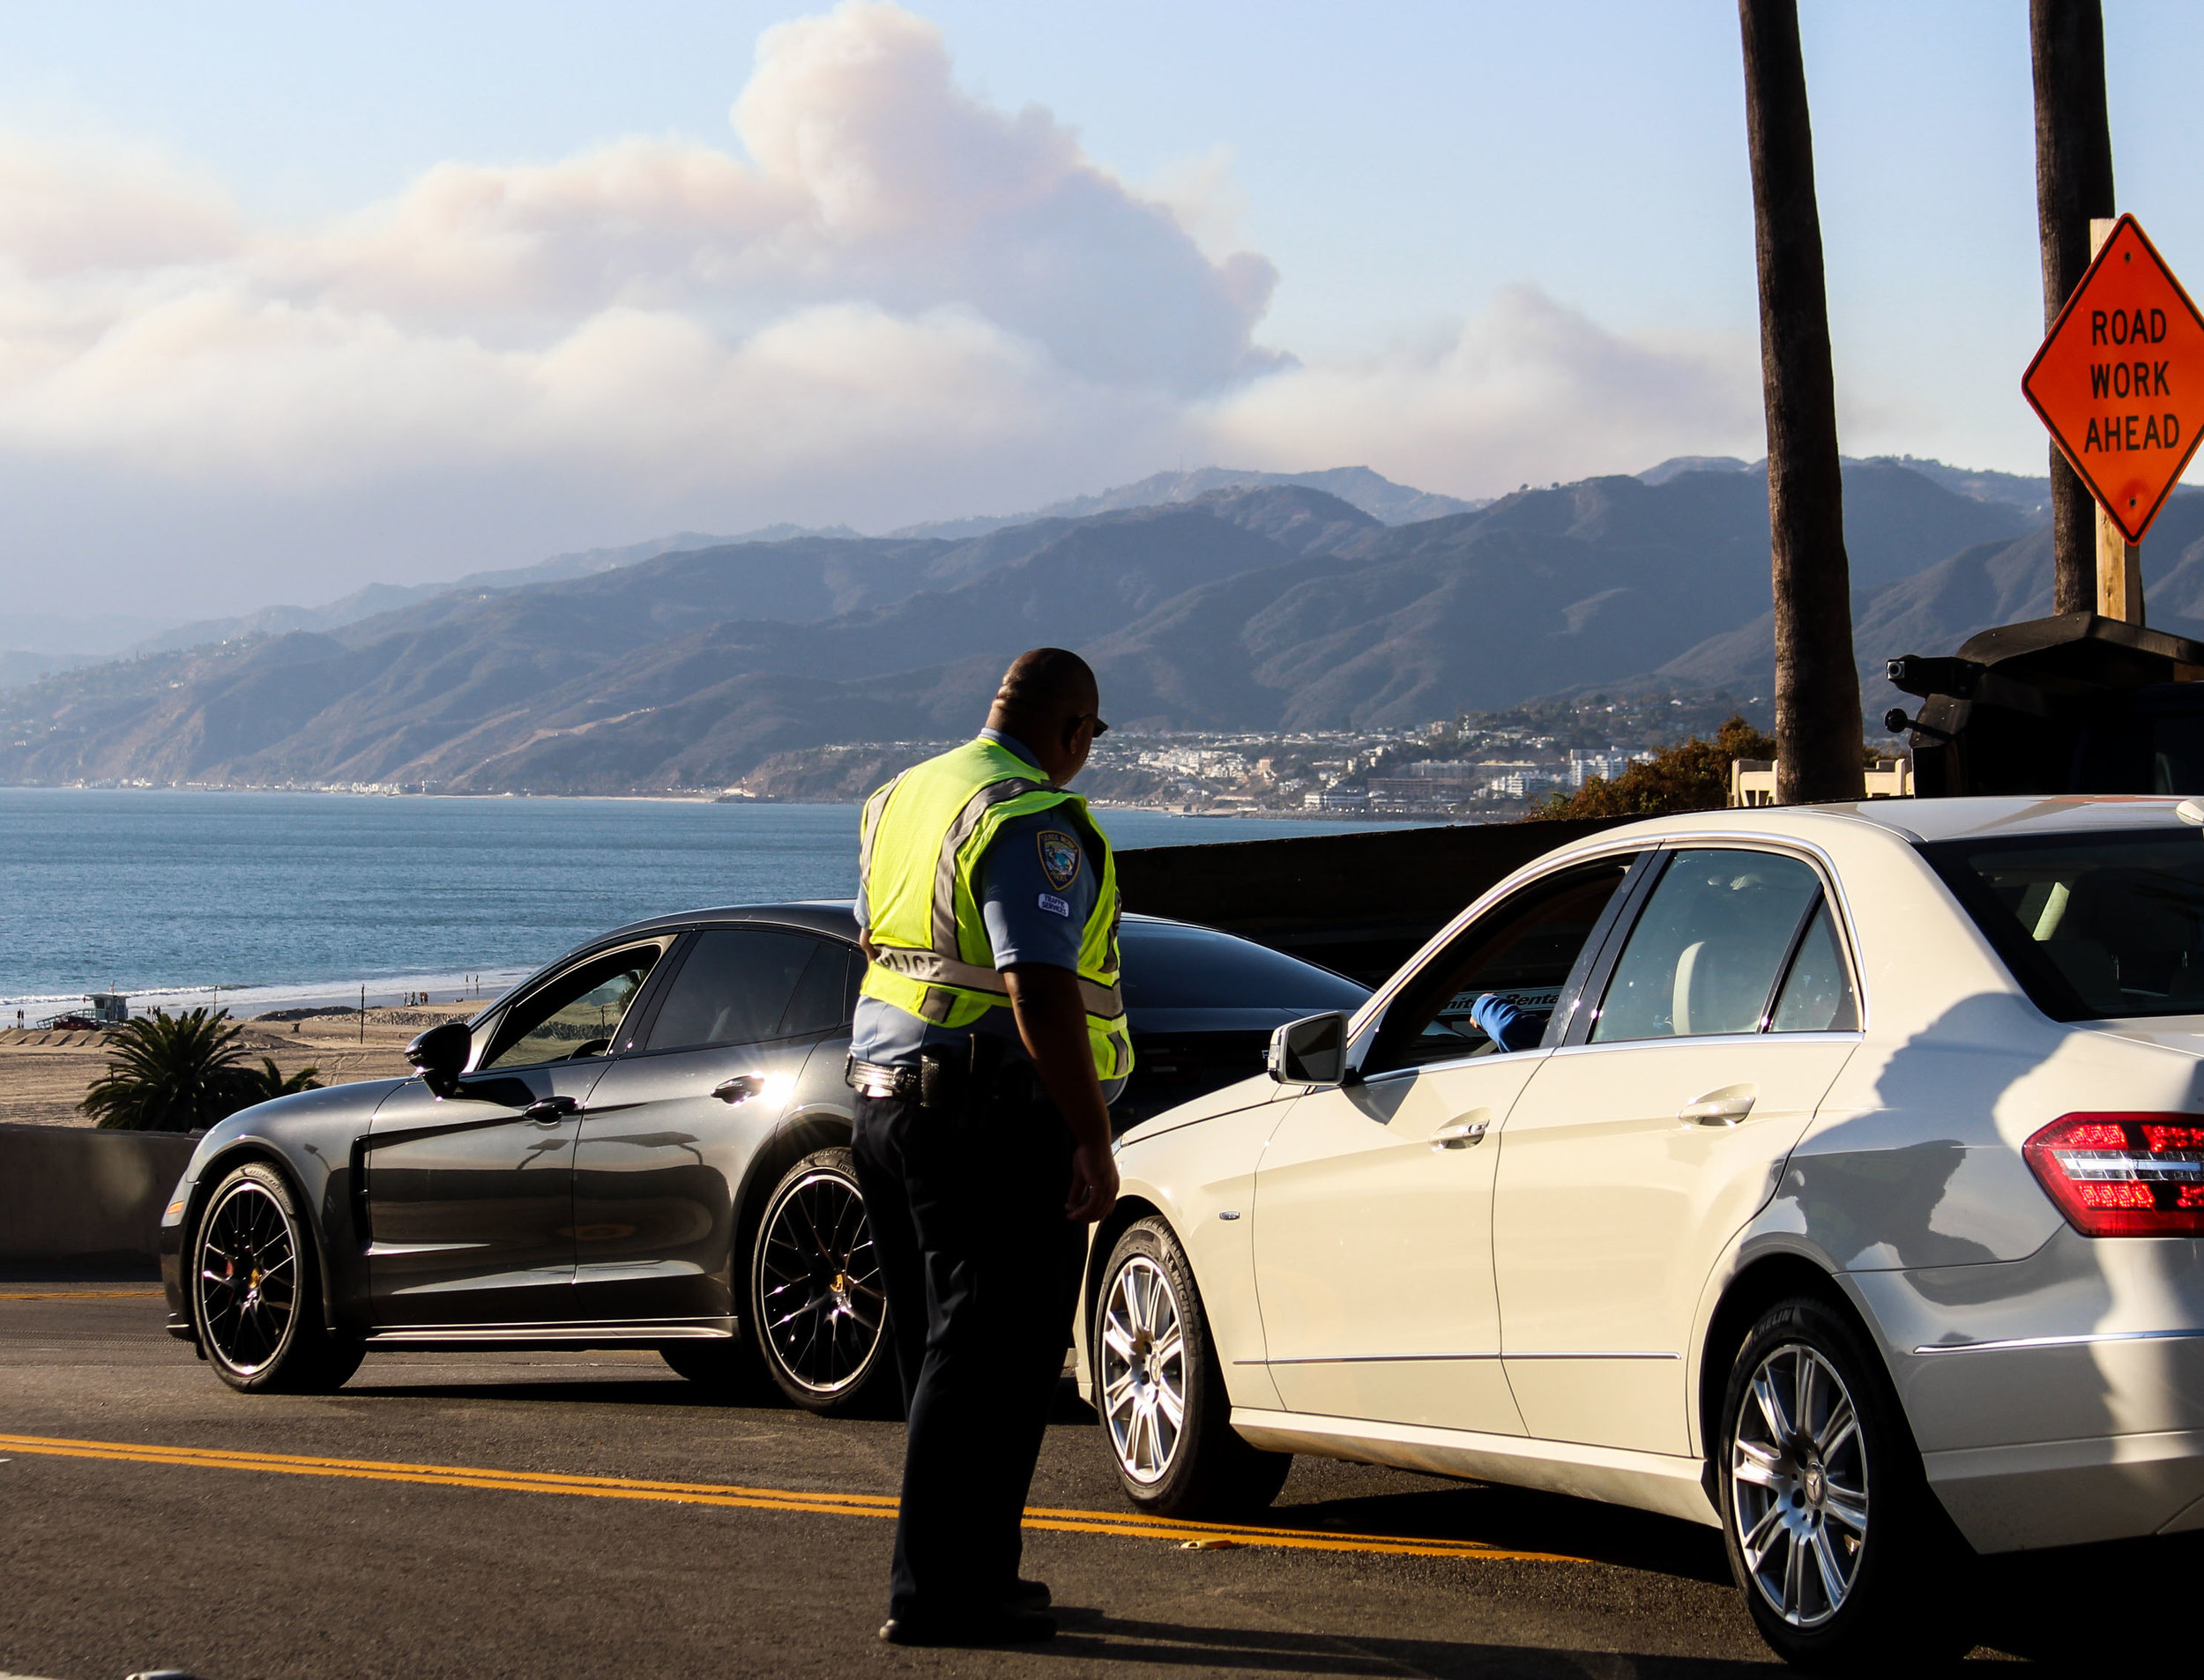  Santa Monica Police officer stands by as Malibu residents attempt to drive through the closed off California Incline off of Ocean Ave in Santa Monica, California, on November 9, 2018. (Pyper Witt/ Corsair Staff) 